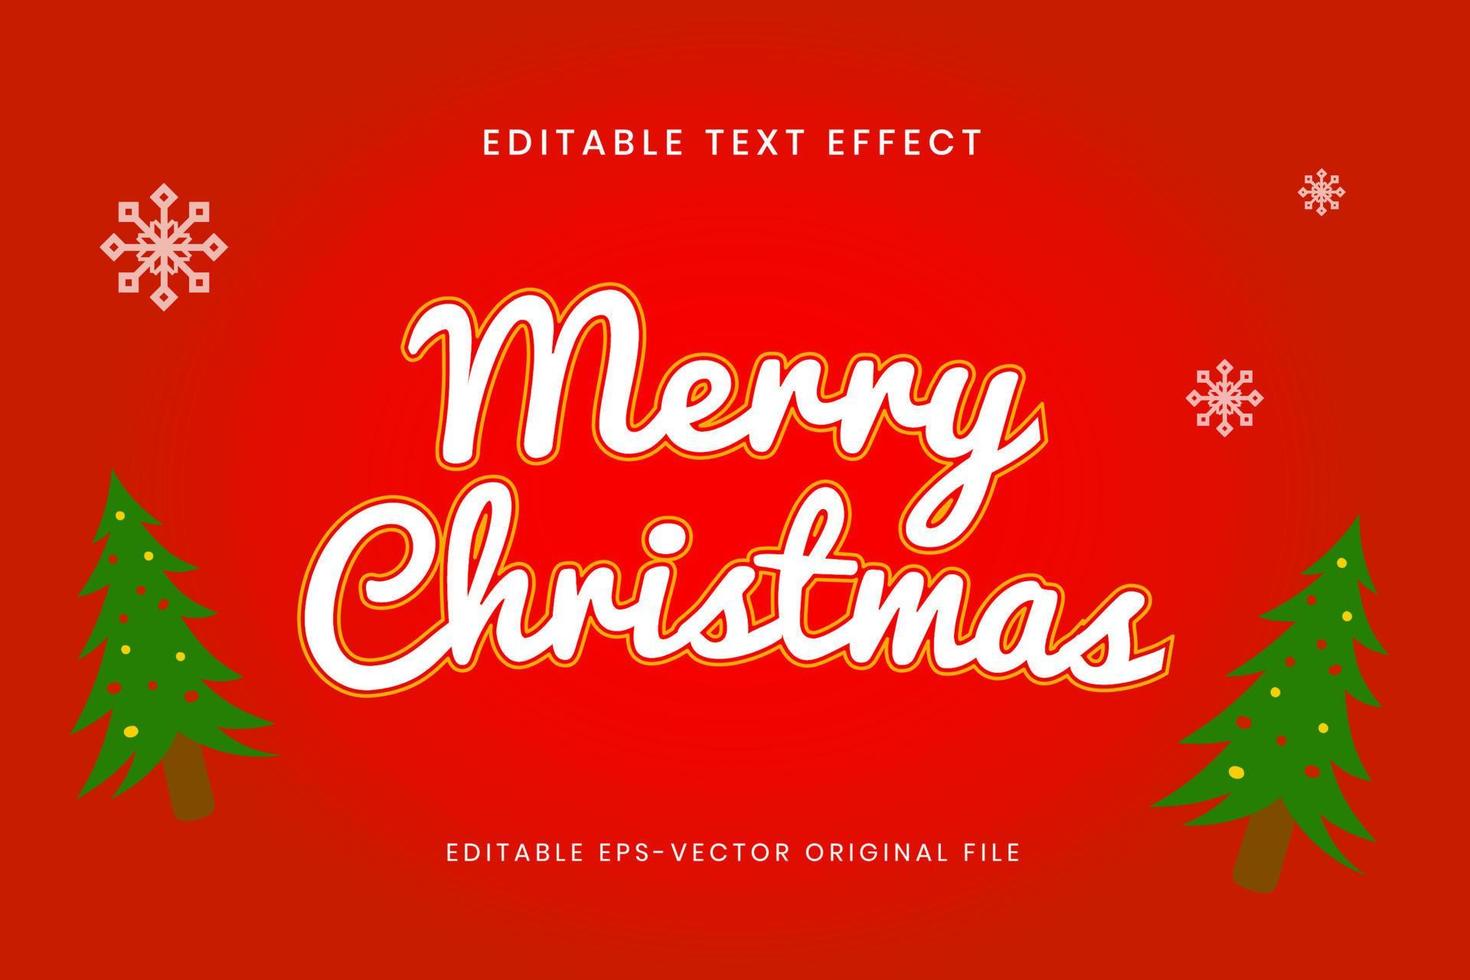 Merry Christmas Text Effect DesignMerry Christmas Text Effect Design vector